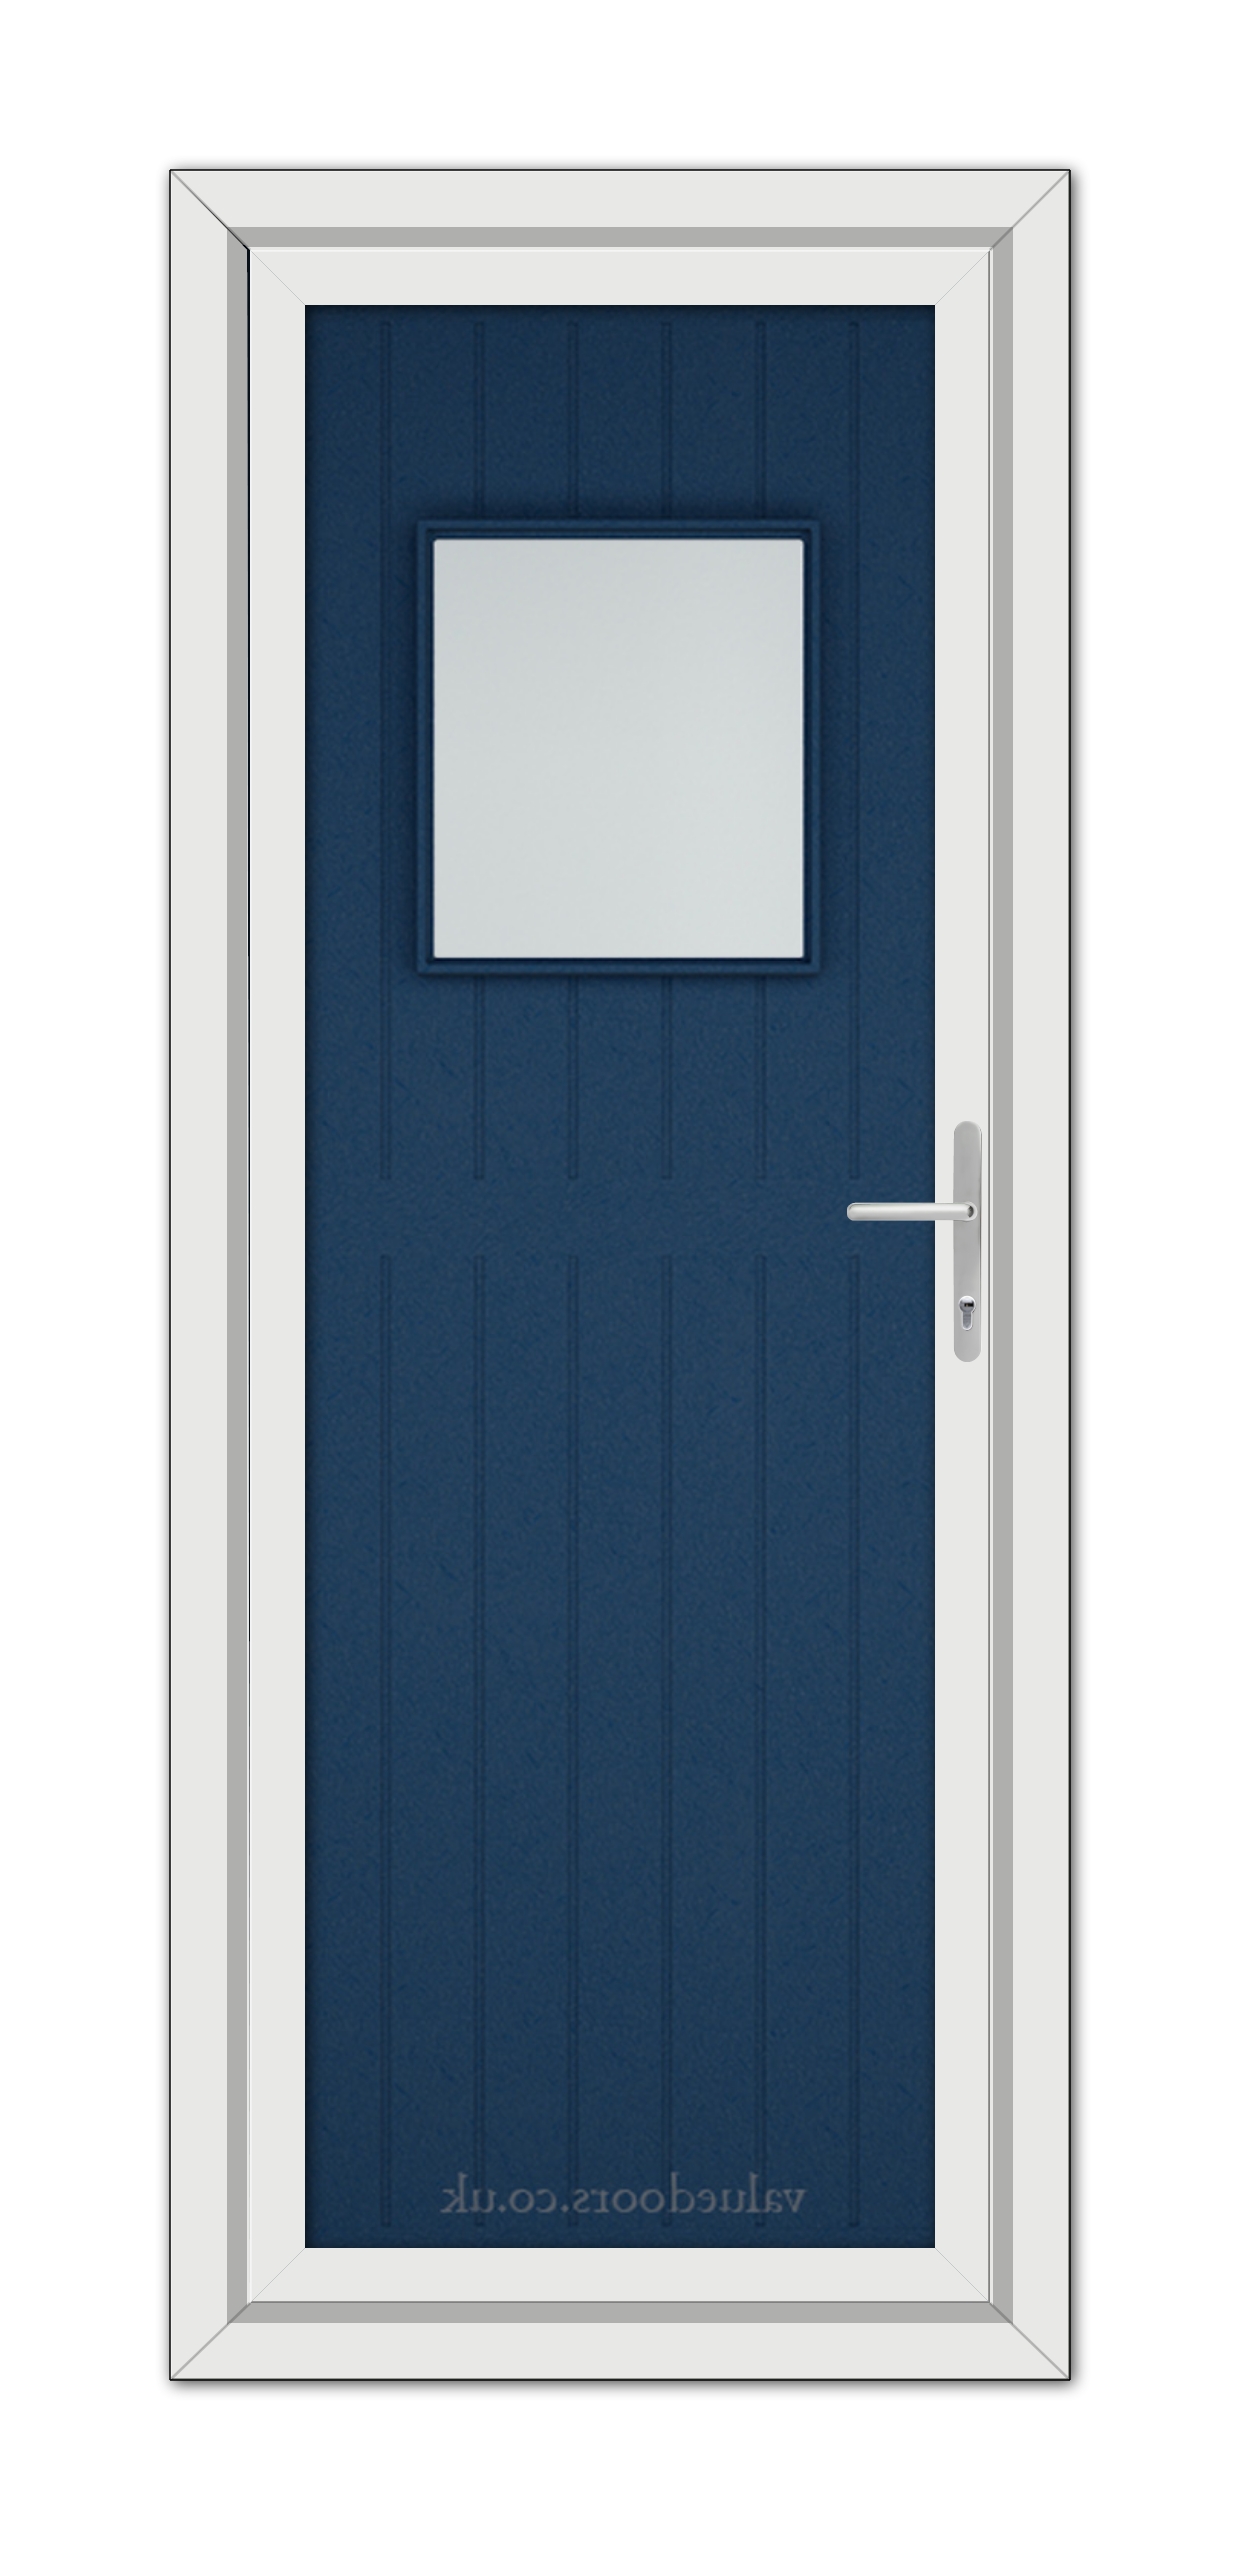 A modern Blue Chatsworth uPVC door with a small rectangular window and a white frame, featuring a metallic handle on the right side.